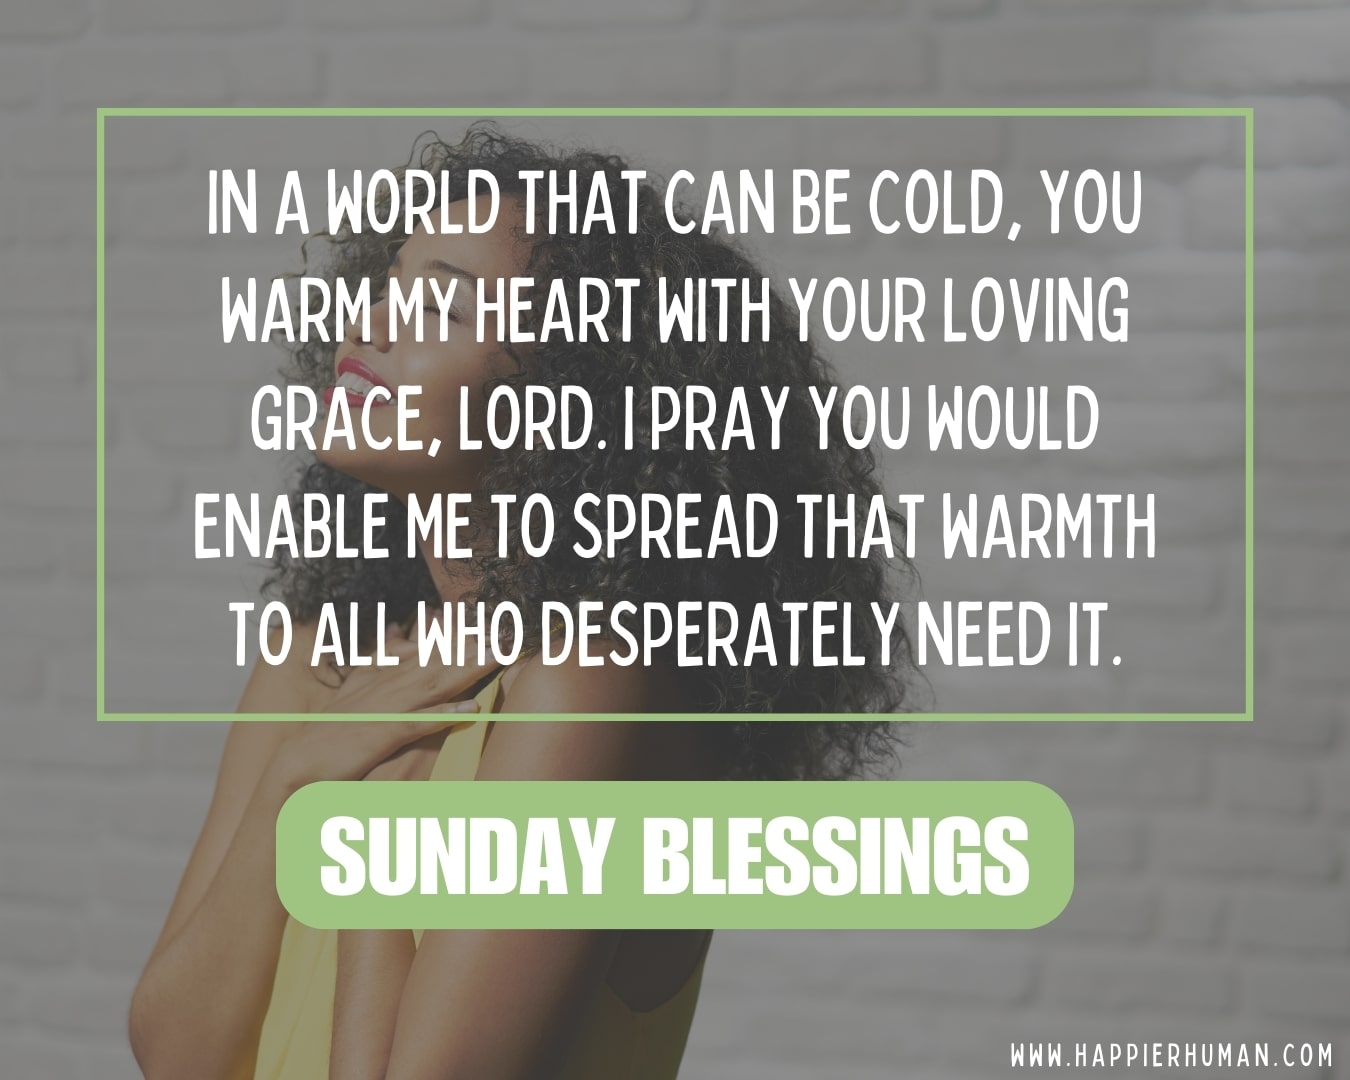 good morning sunday blessings | good morning sunday blessings images and quotes